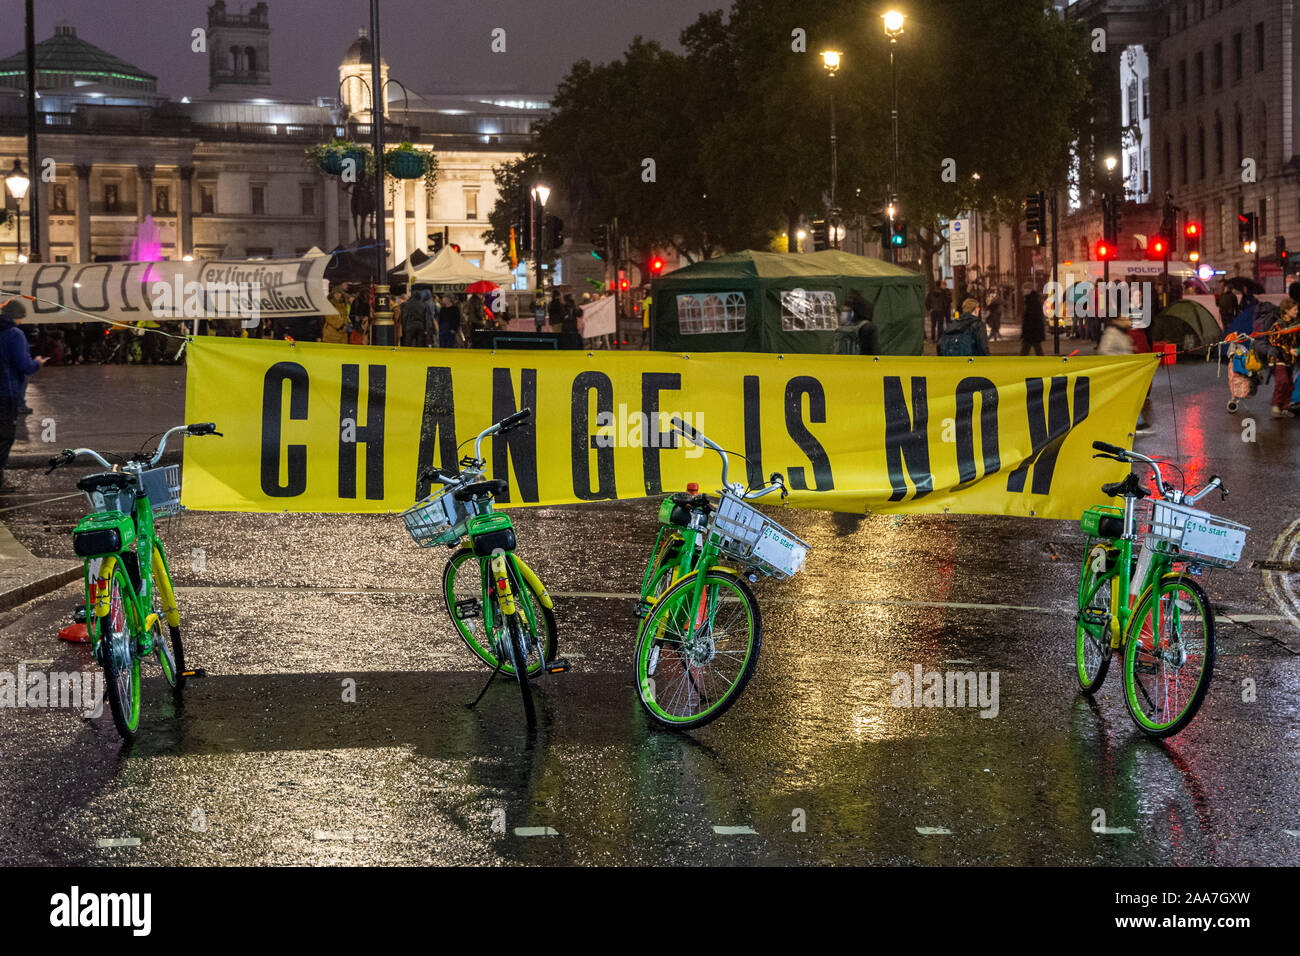 London, England, UK - October 7, 2019: Lime Bikes electric hire bikes are lined up at a road block in Trafalgar Square during Extinction Rebellion pro Stock Photo